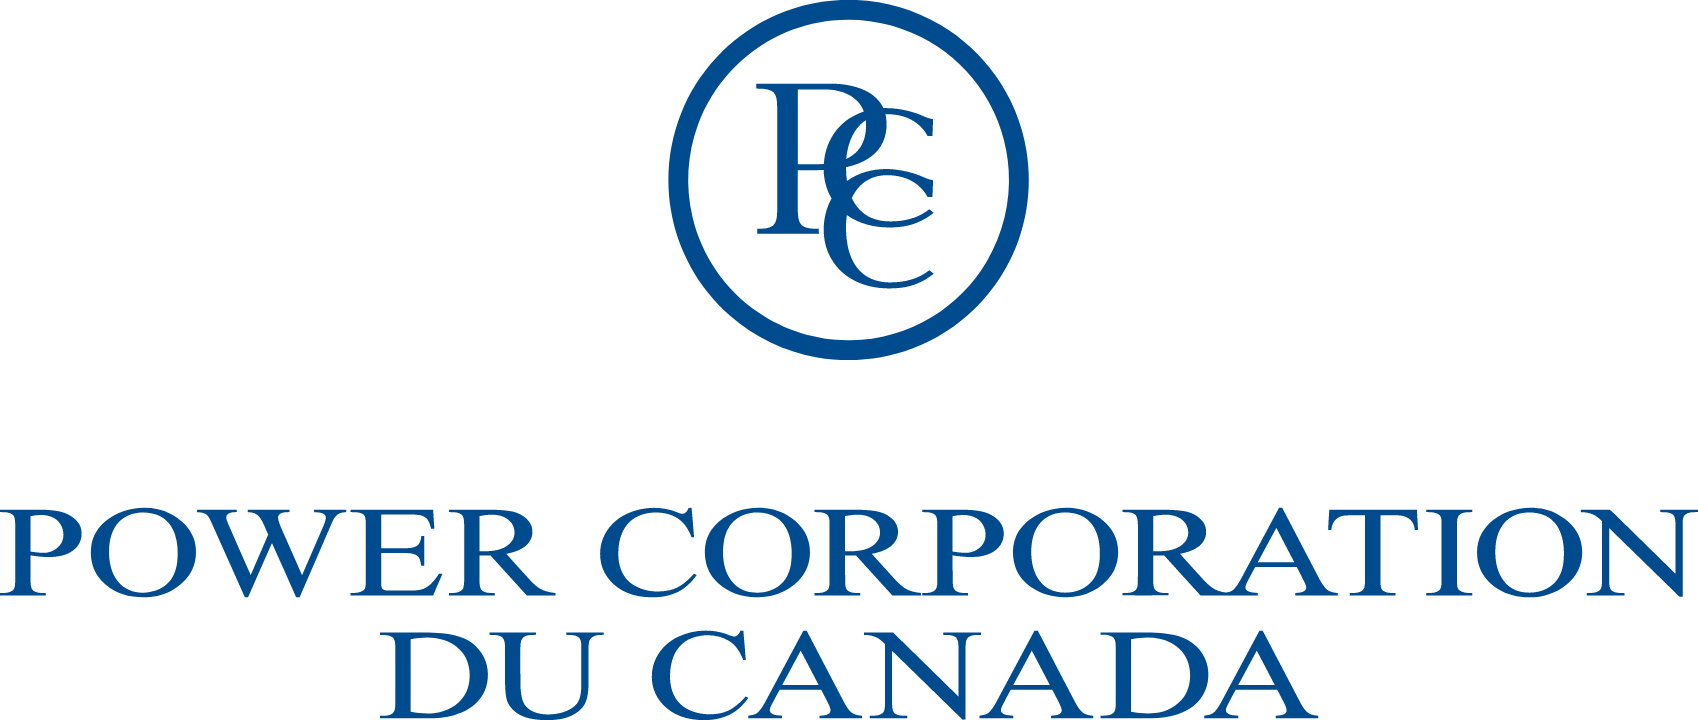 Power Corporation of Canada logo large (transparent PNG)